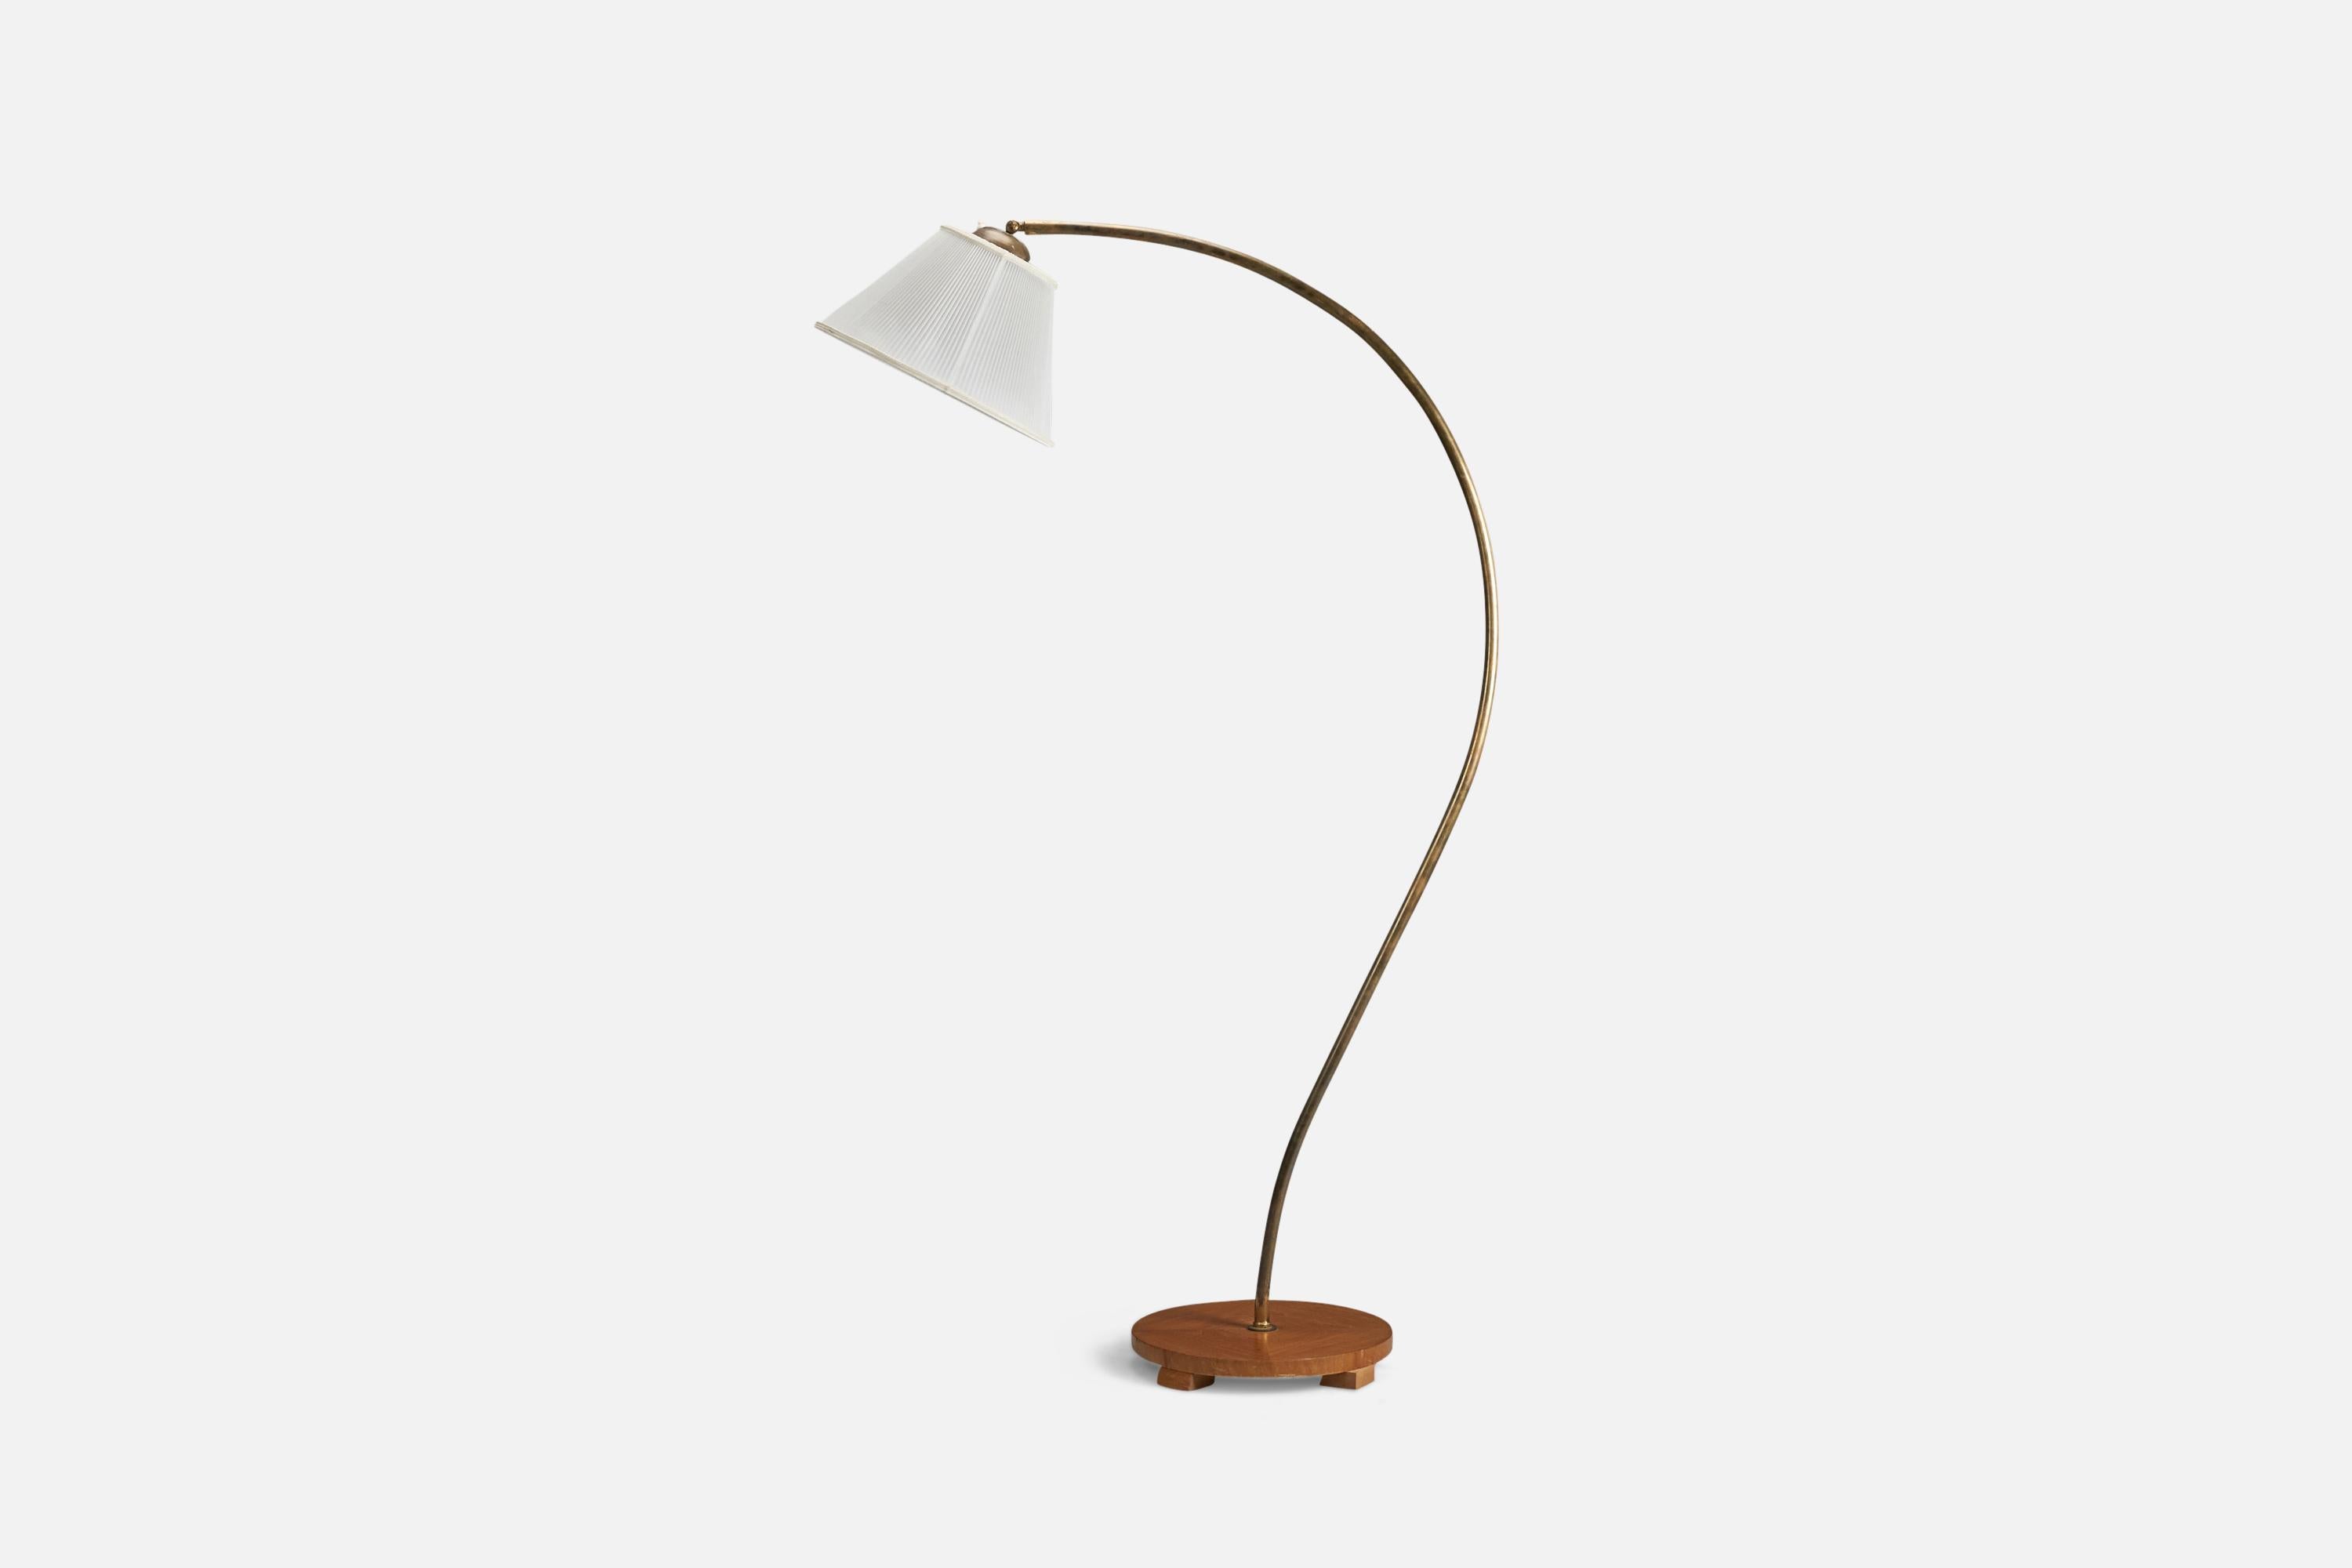 A curved brass, wood and fabric floor lamp designed and produced by a Swedish Designer, Sweden, 1940s.

Socket takes standard E-26 medium base bulb.

There is no maximum wattage stated on the fixture.